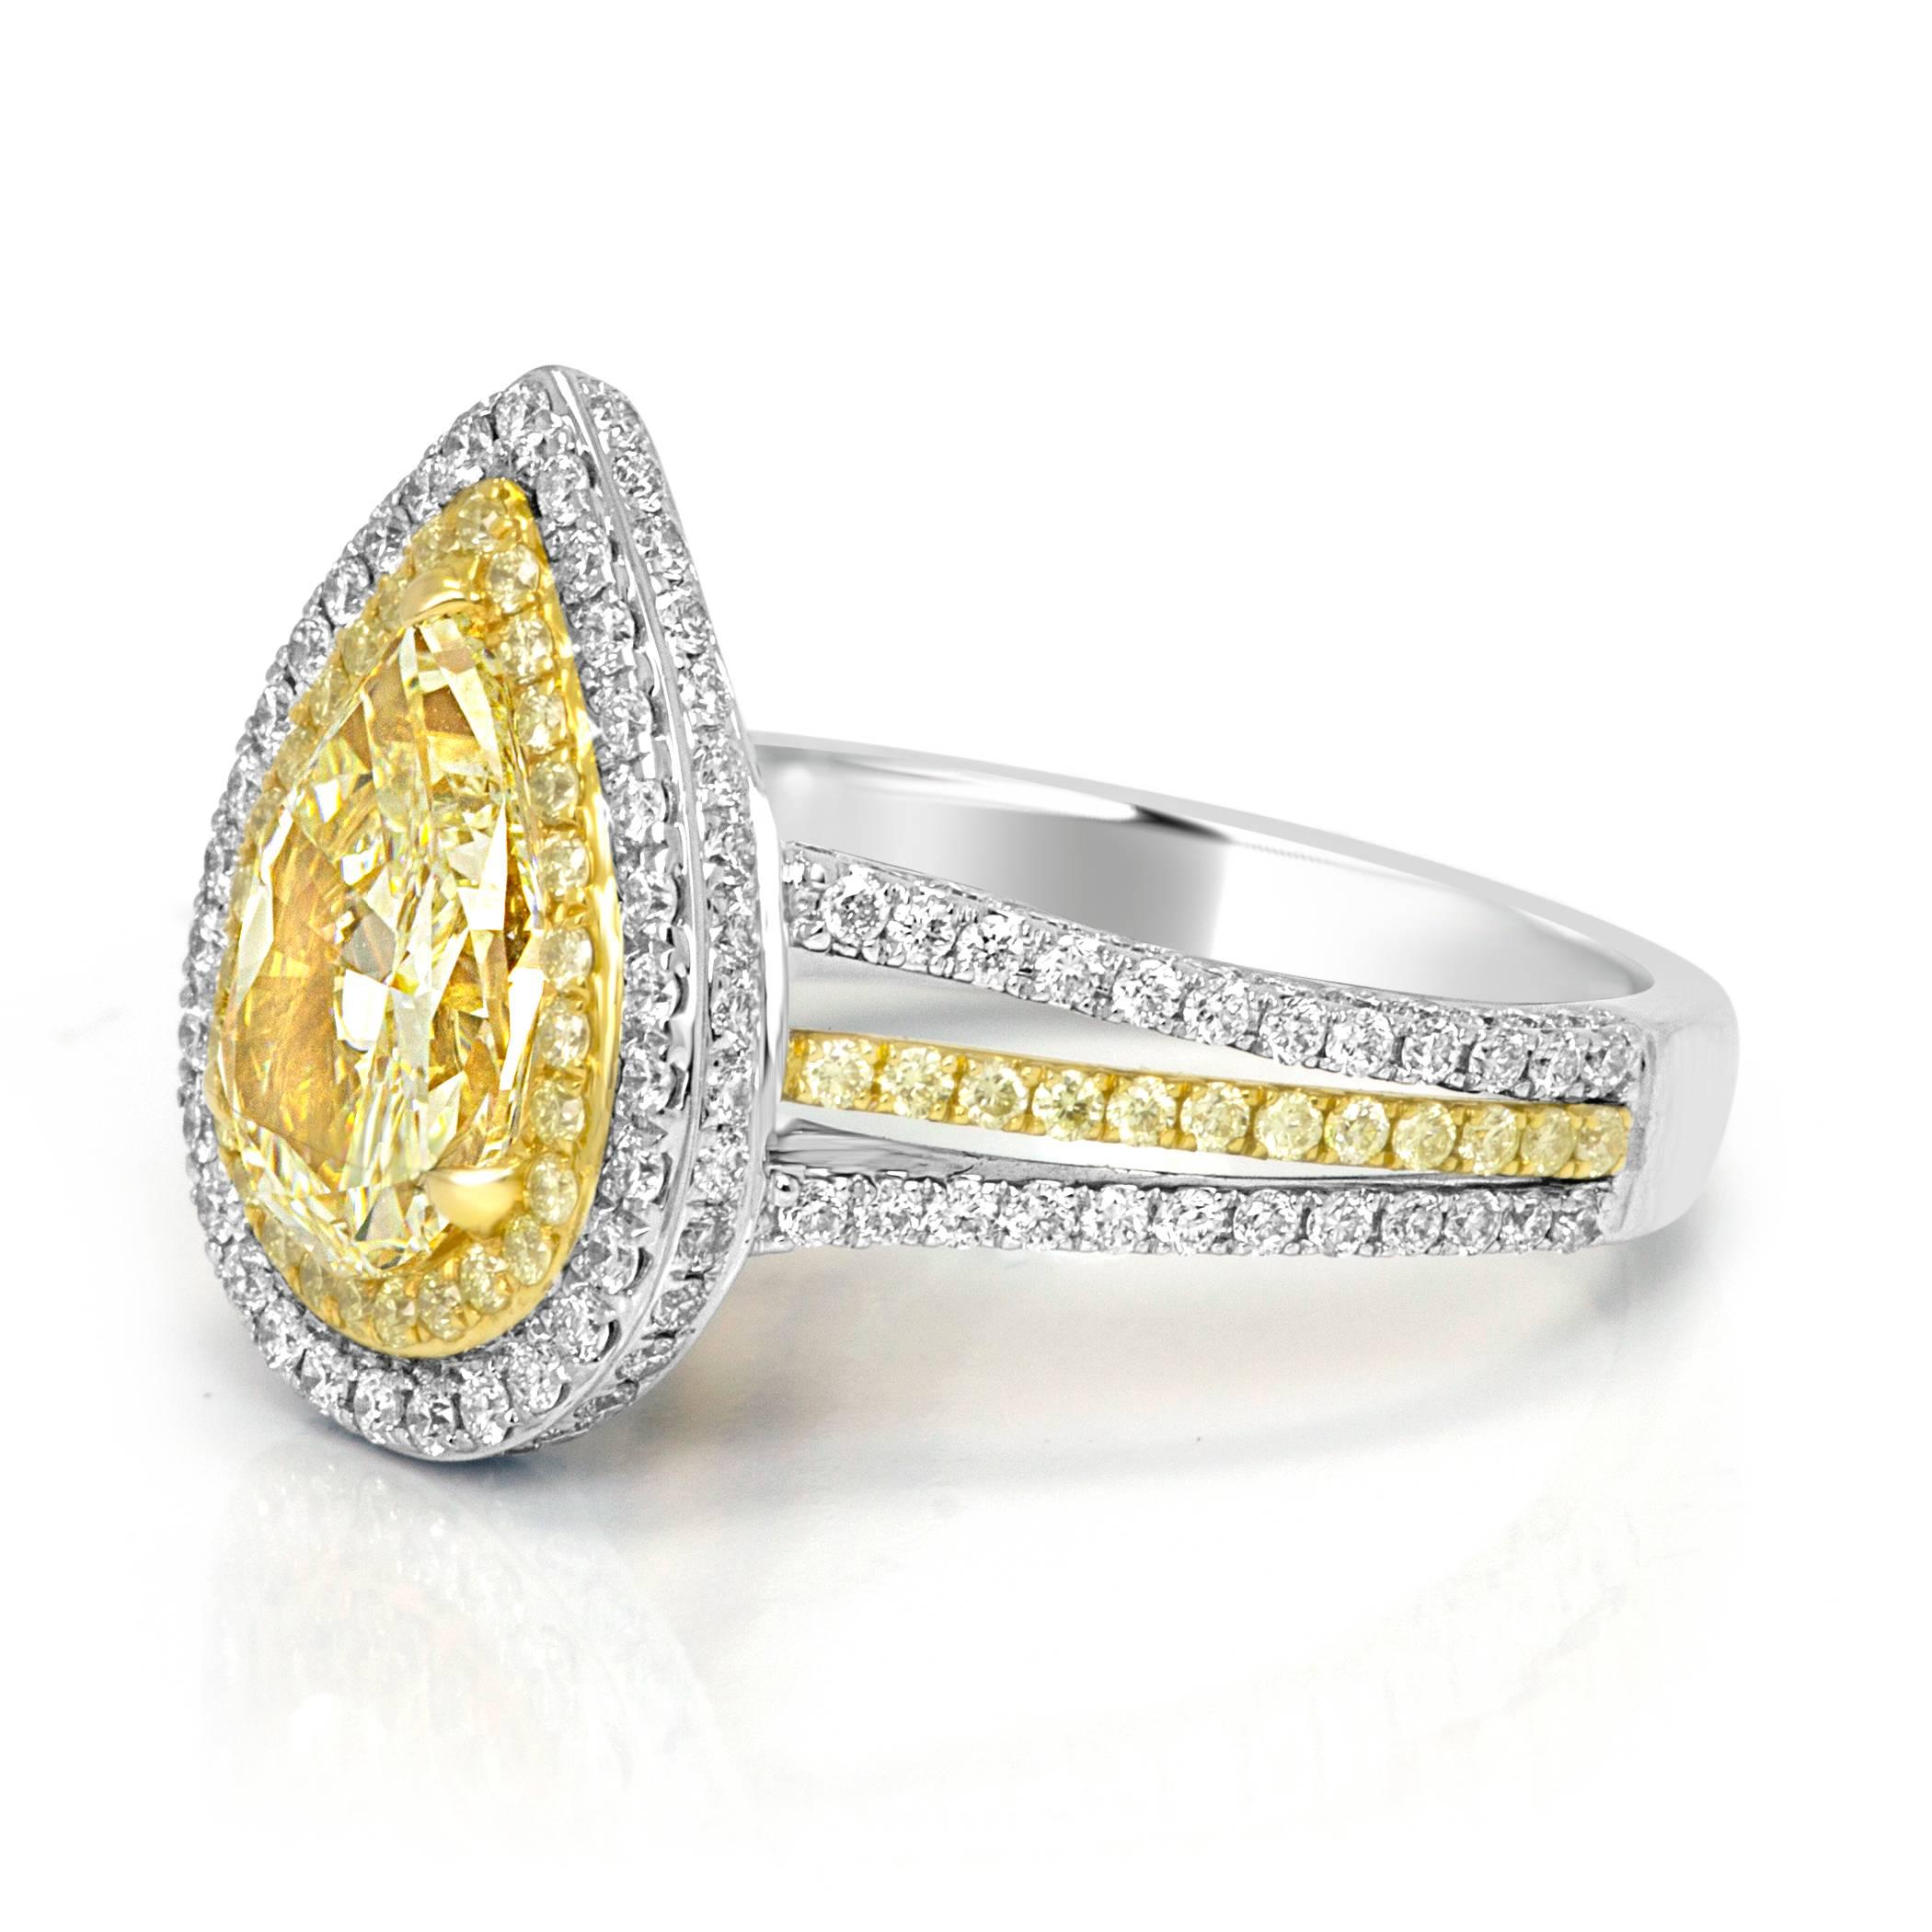 EGL USA Certified Pear shape Natural Fancy Light Yellow Diamond VS1 Clarity 2.49 Carat encircled in a Halo of Natural Fancy Yellow Diamonds Round Brilliant SI Clarity 0.44 Carat and White G-H Color VS-SI Clarity Round Brilliant Diamonds 1.07 carat